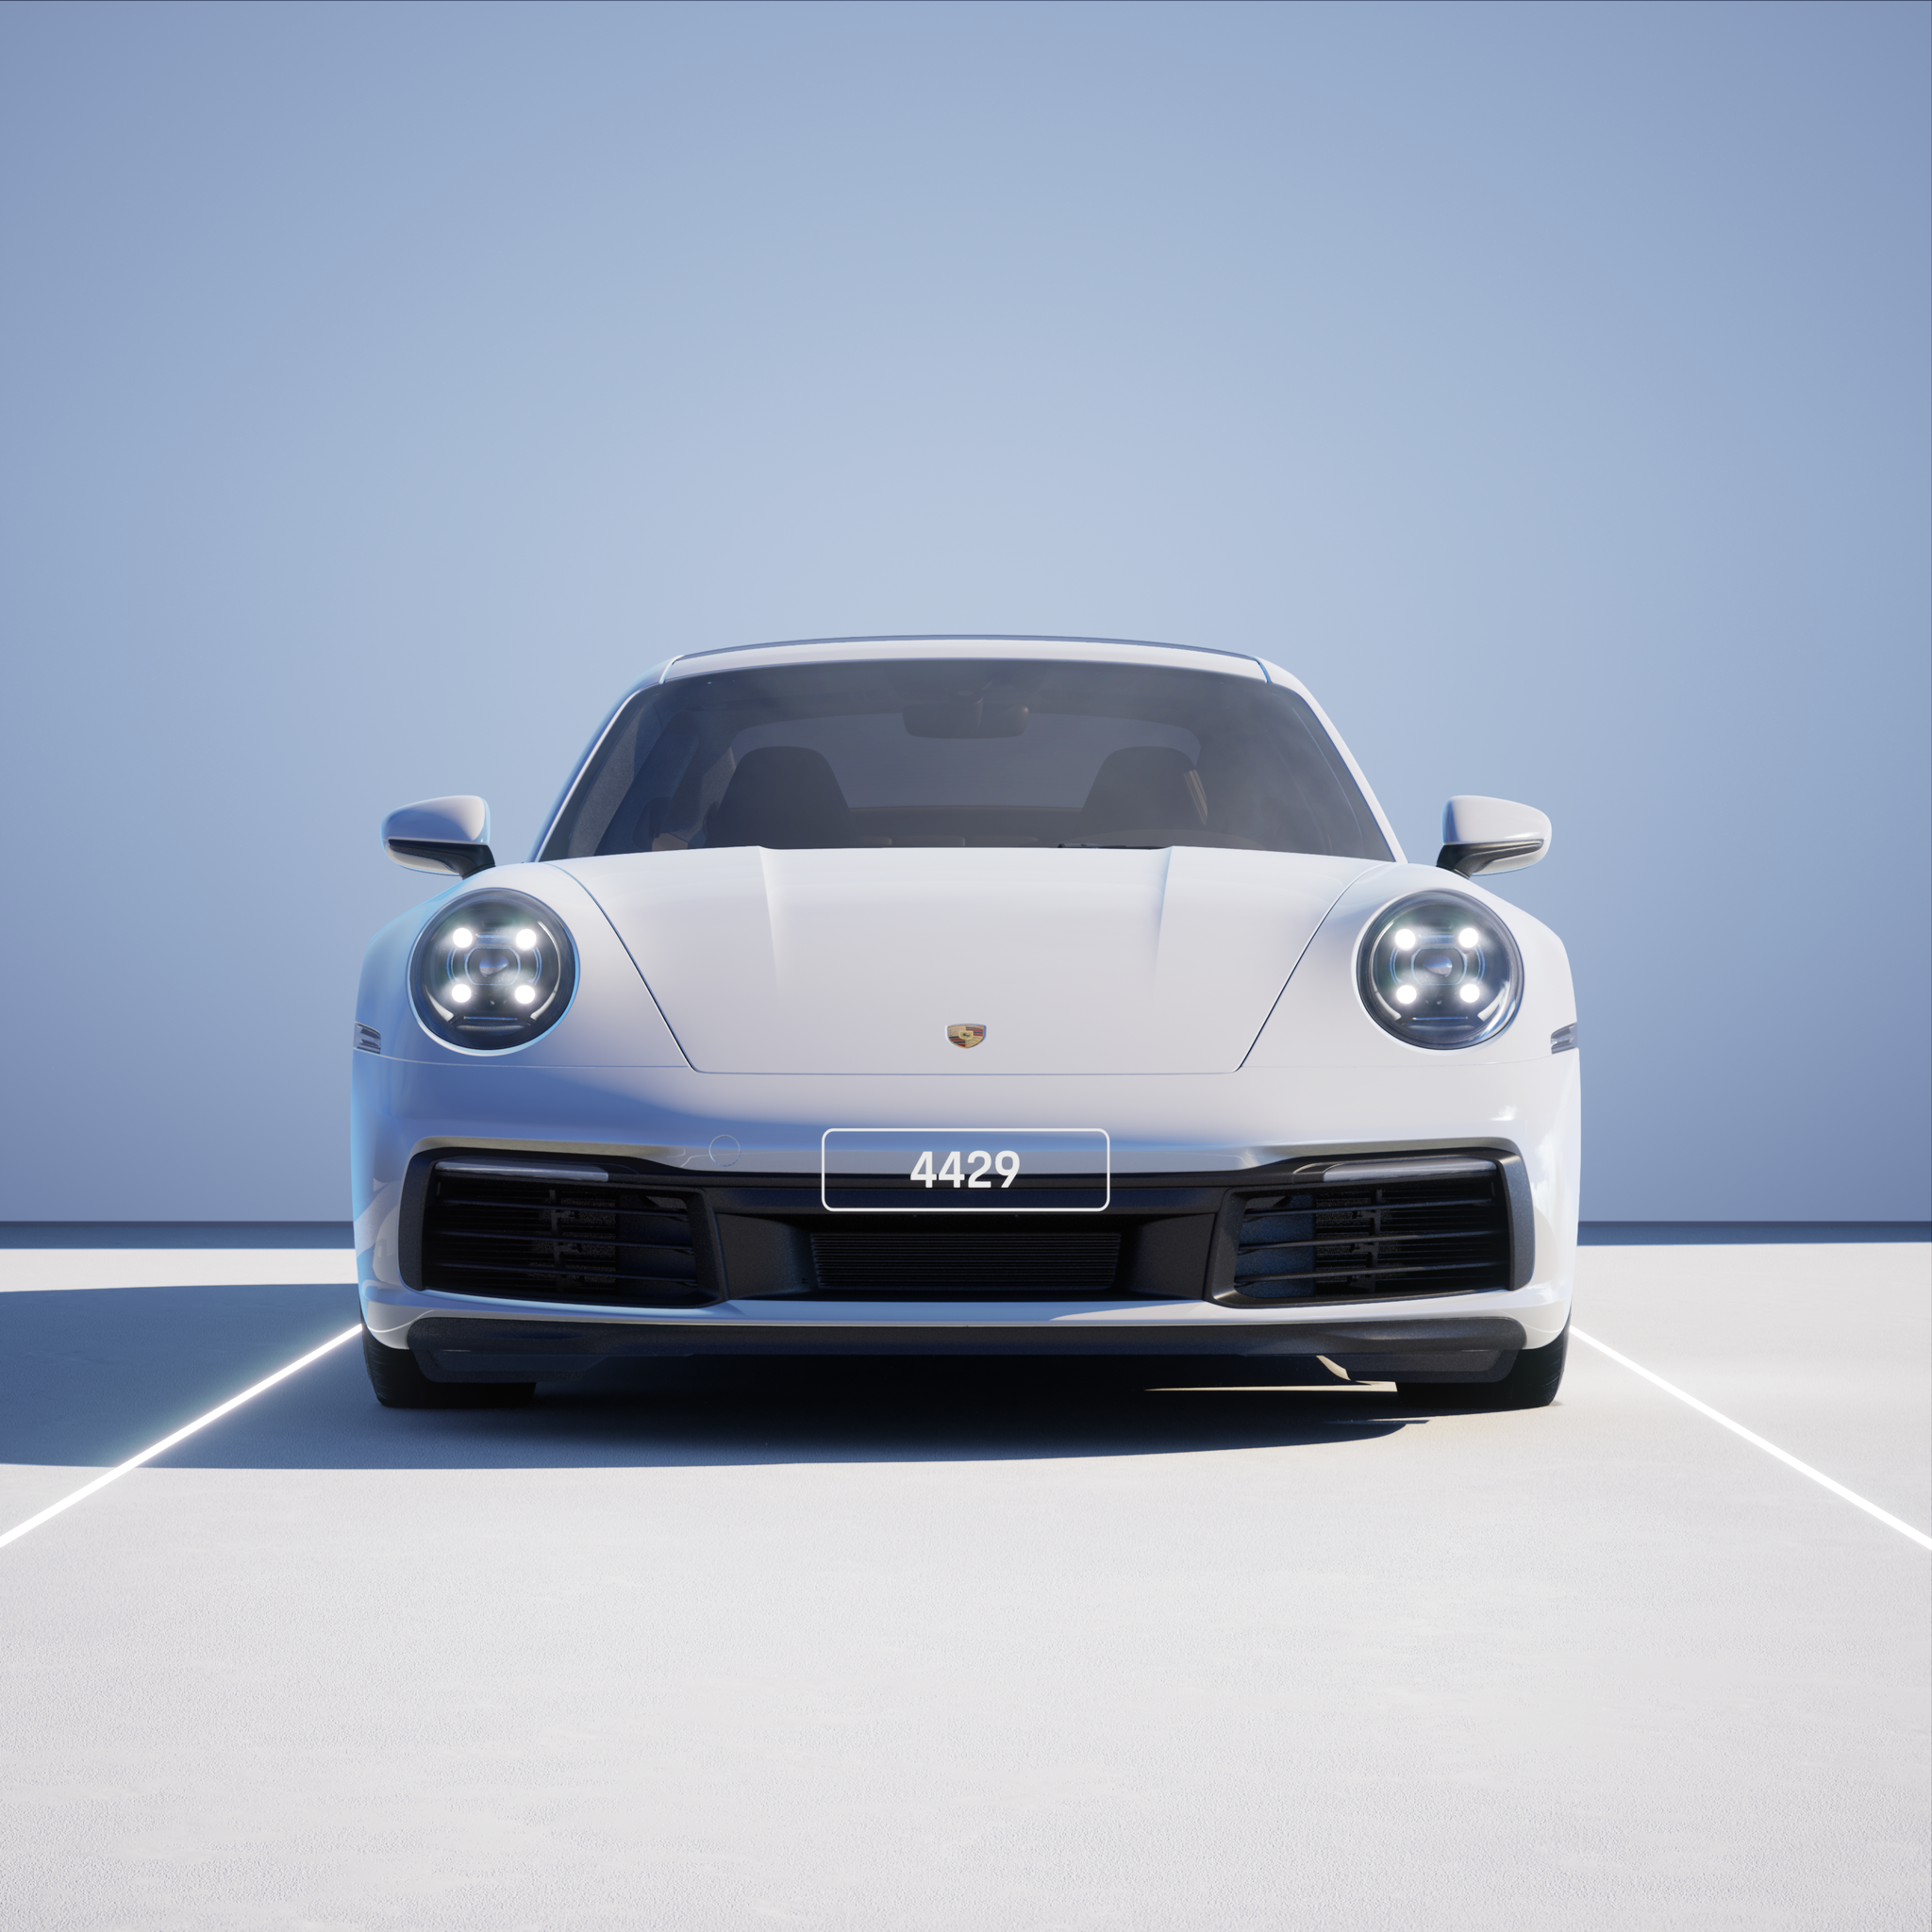 The PORSCHΞ 911 4429 image in phase